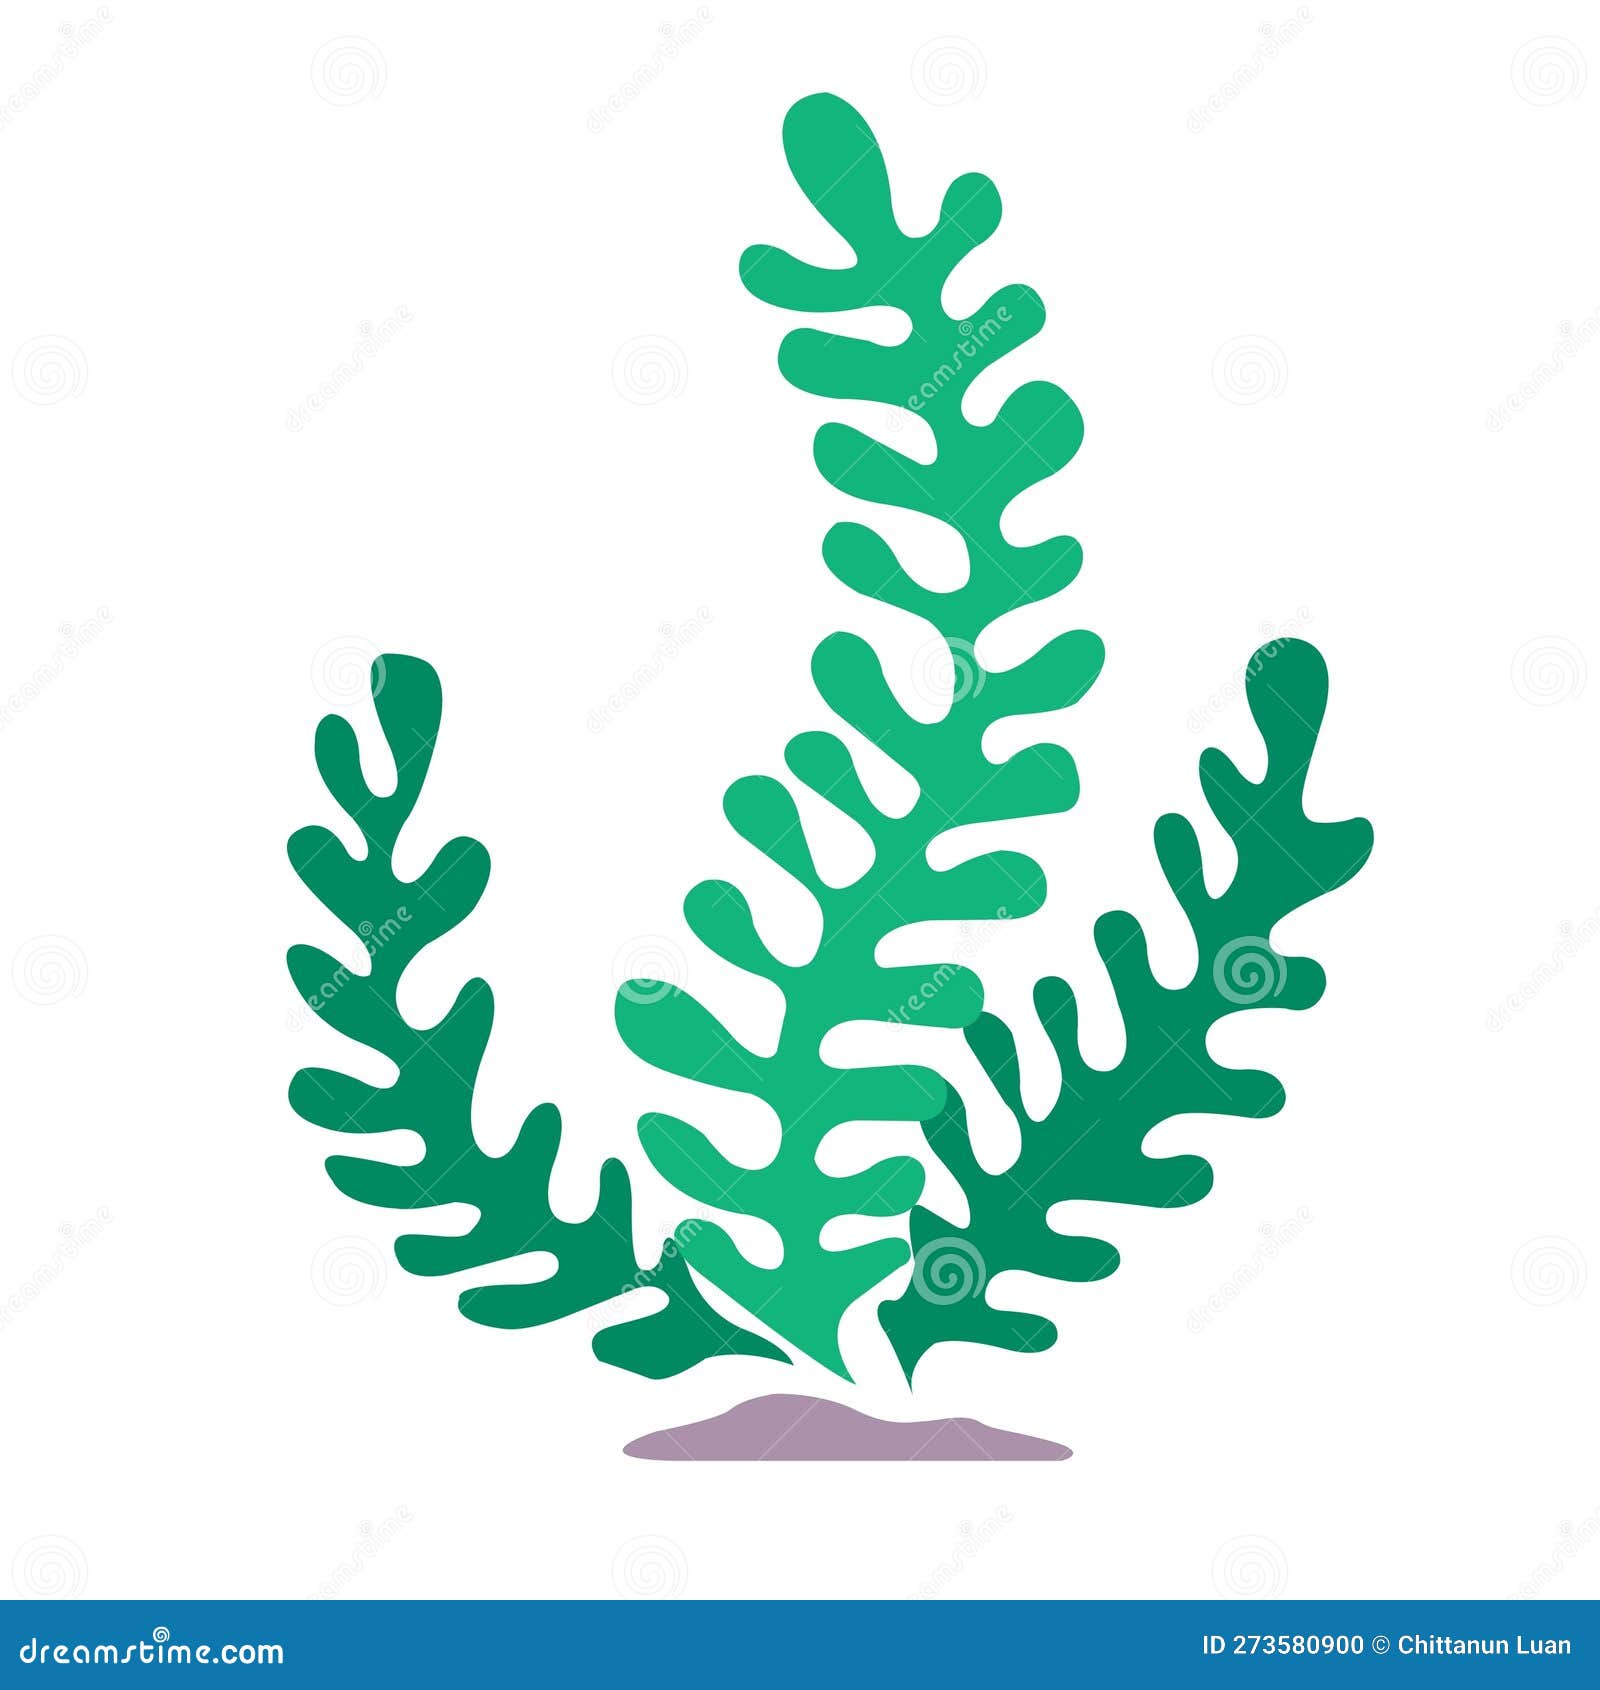 Seaweed, Coral and Sea Grass Flat Design Vector for Decoration on